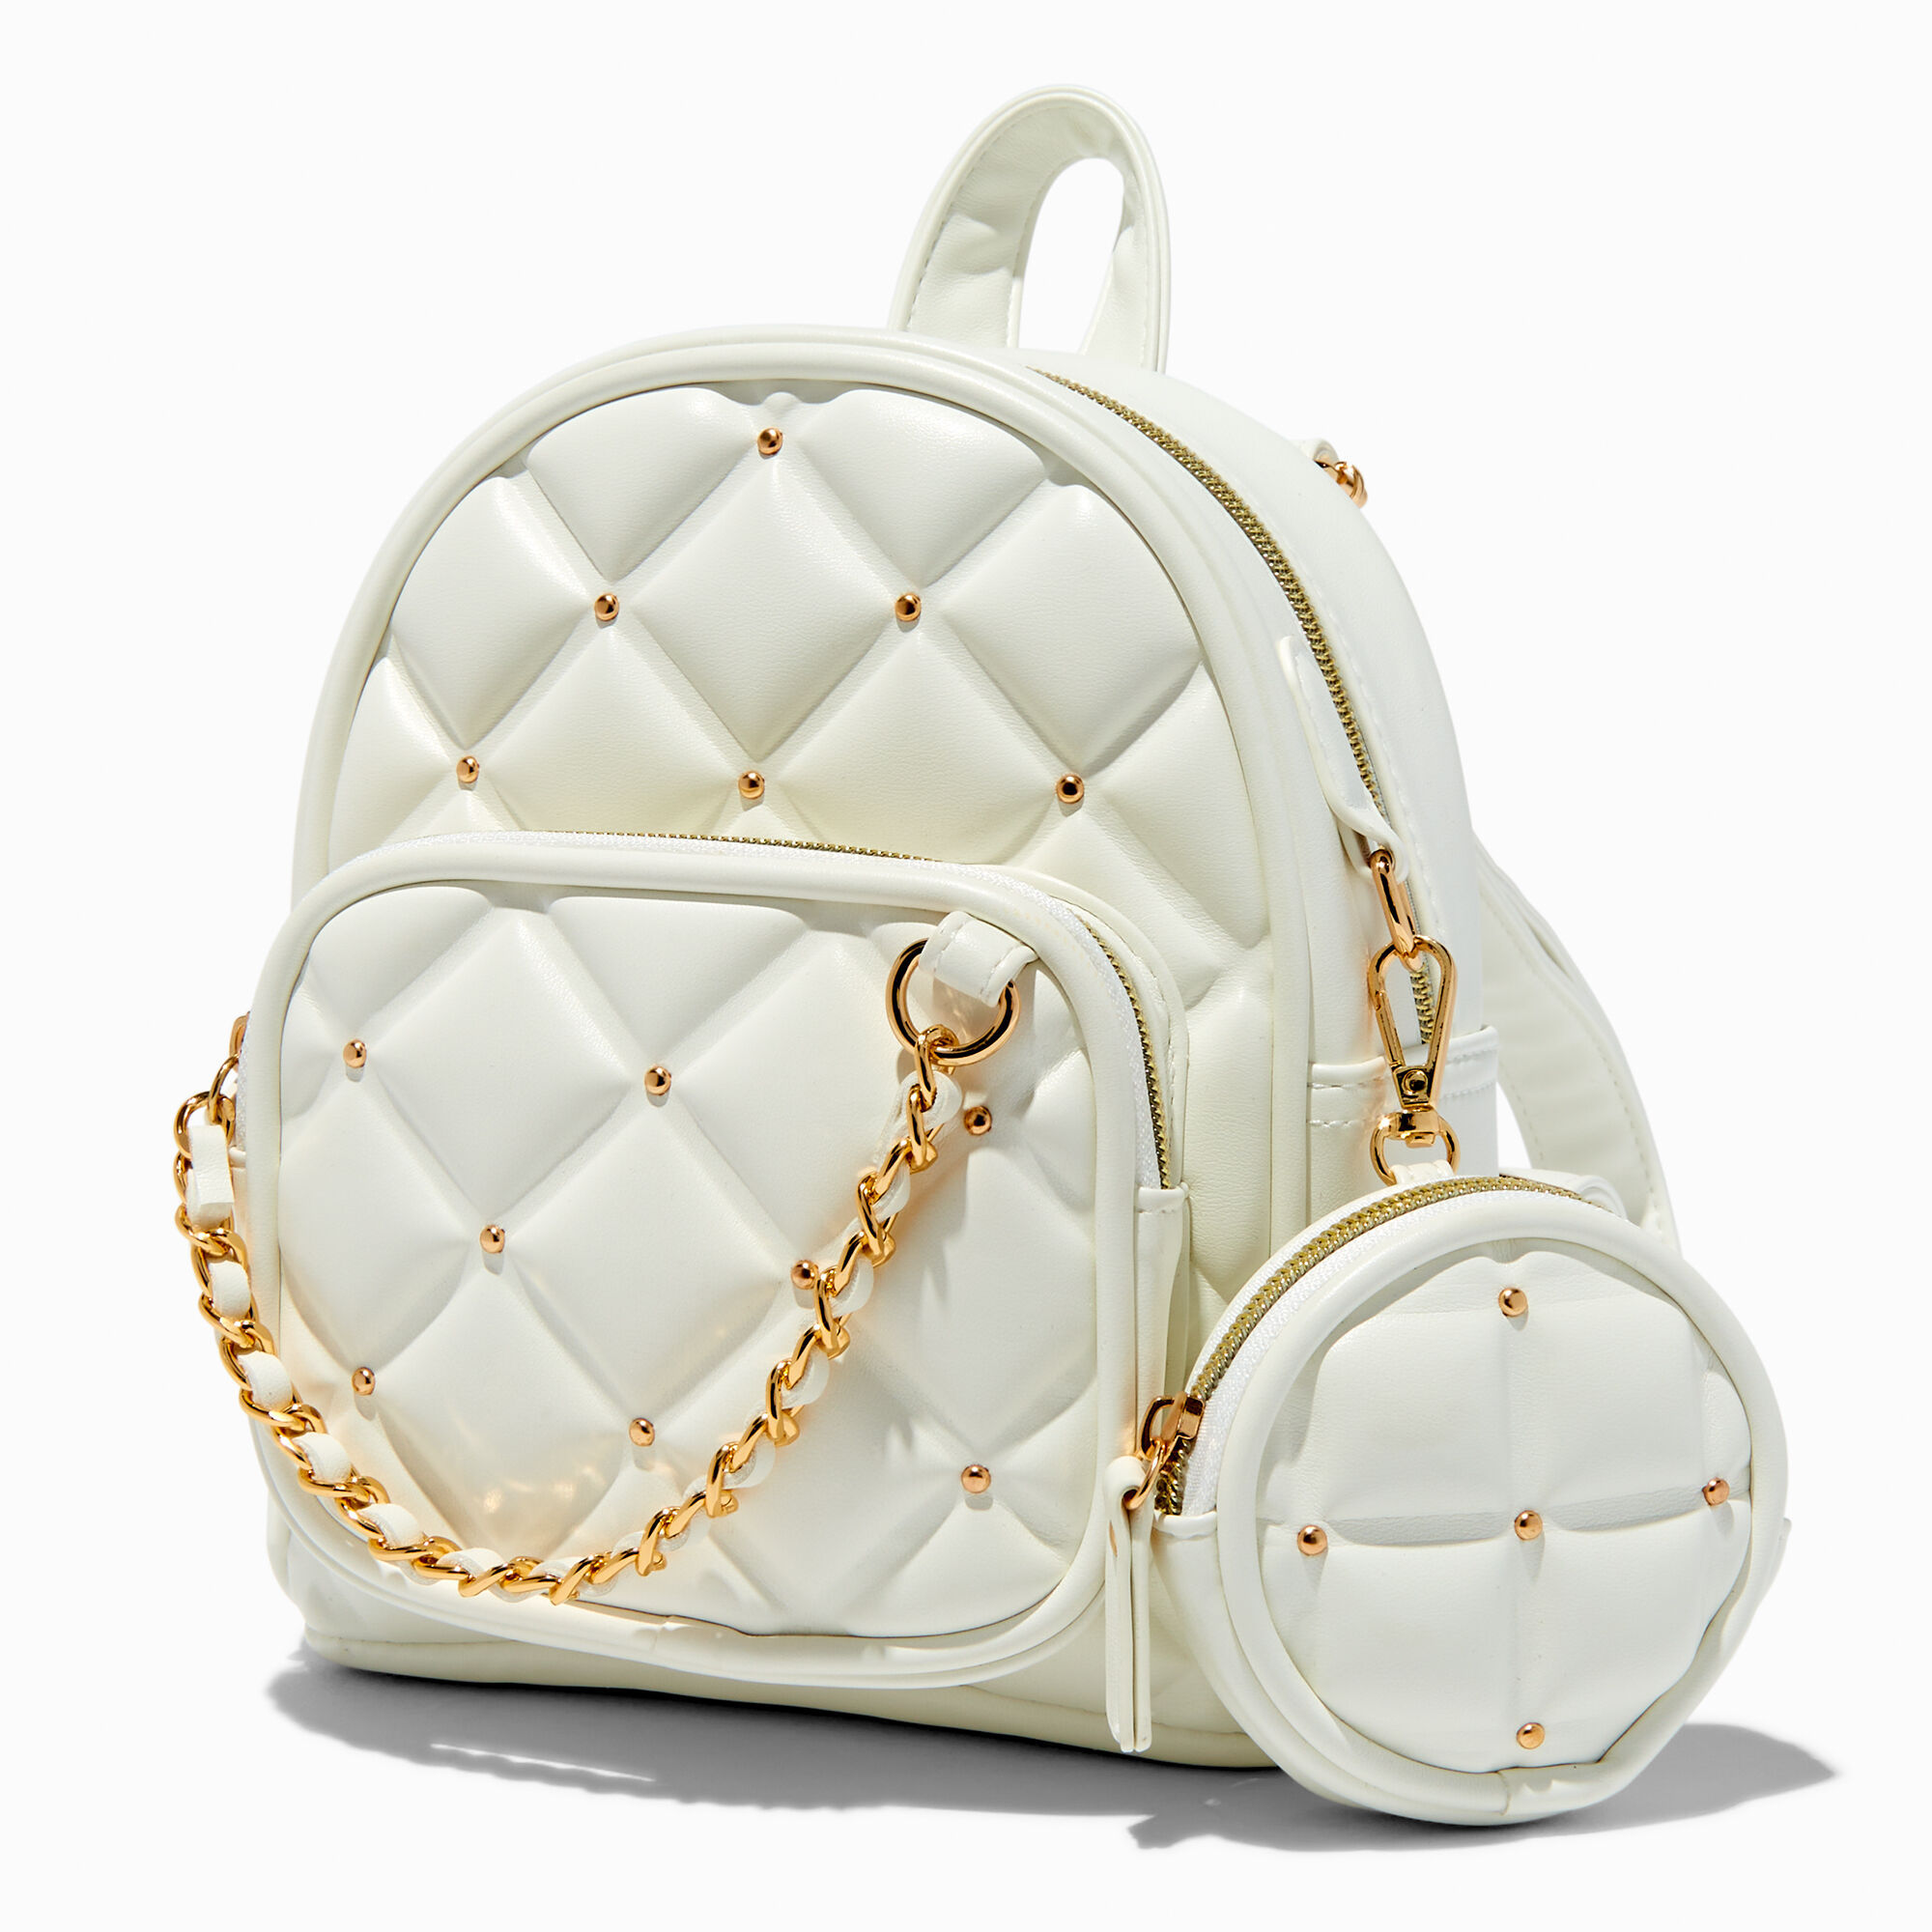 View Claires GoldTone Studded Quilted Small Backpack White information